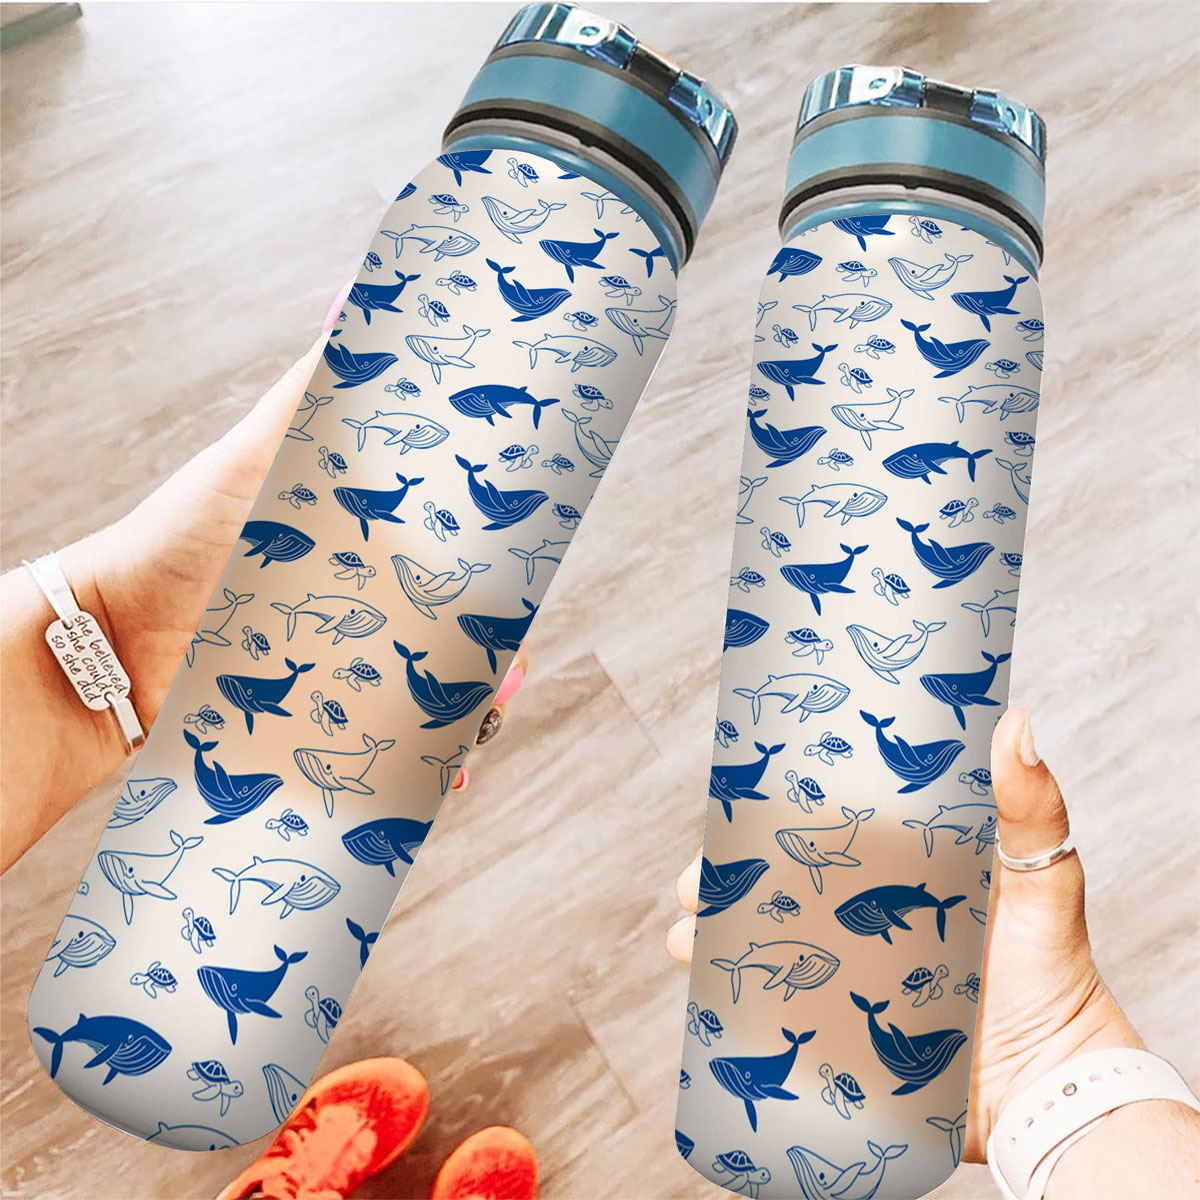 Blue Whale And White Tracker Bottle